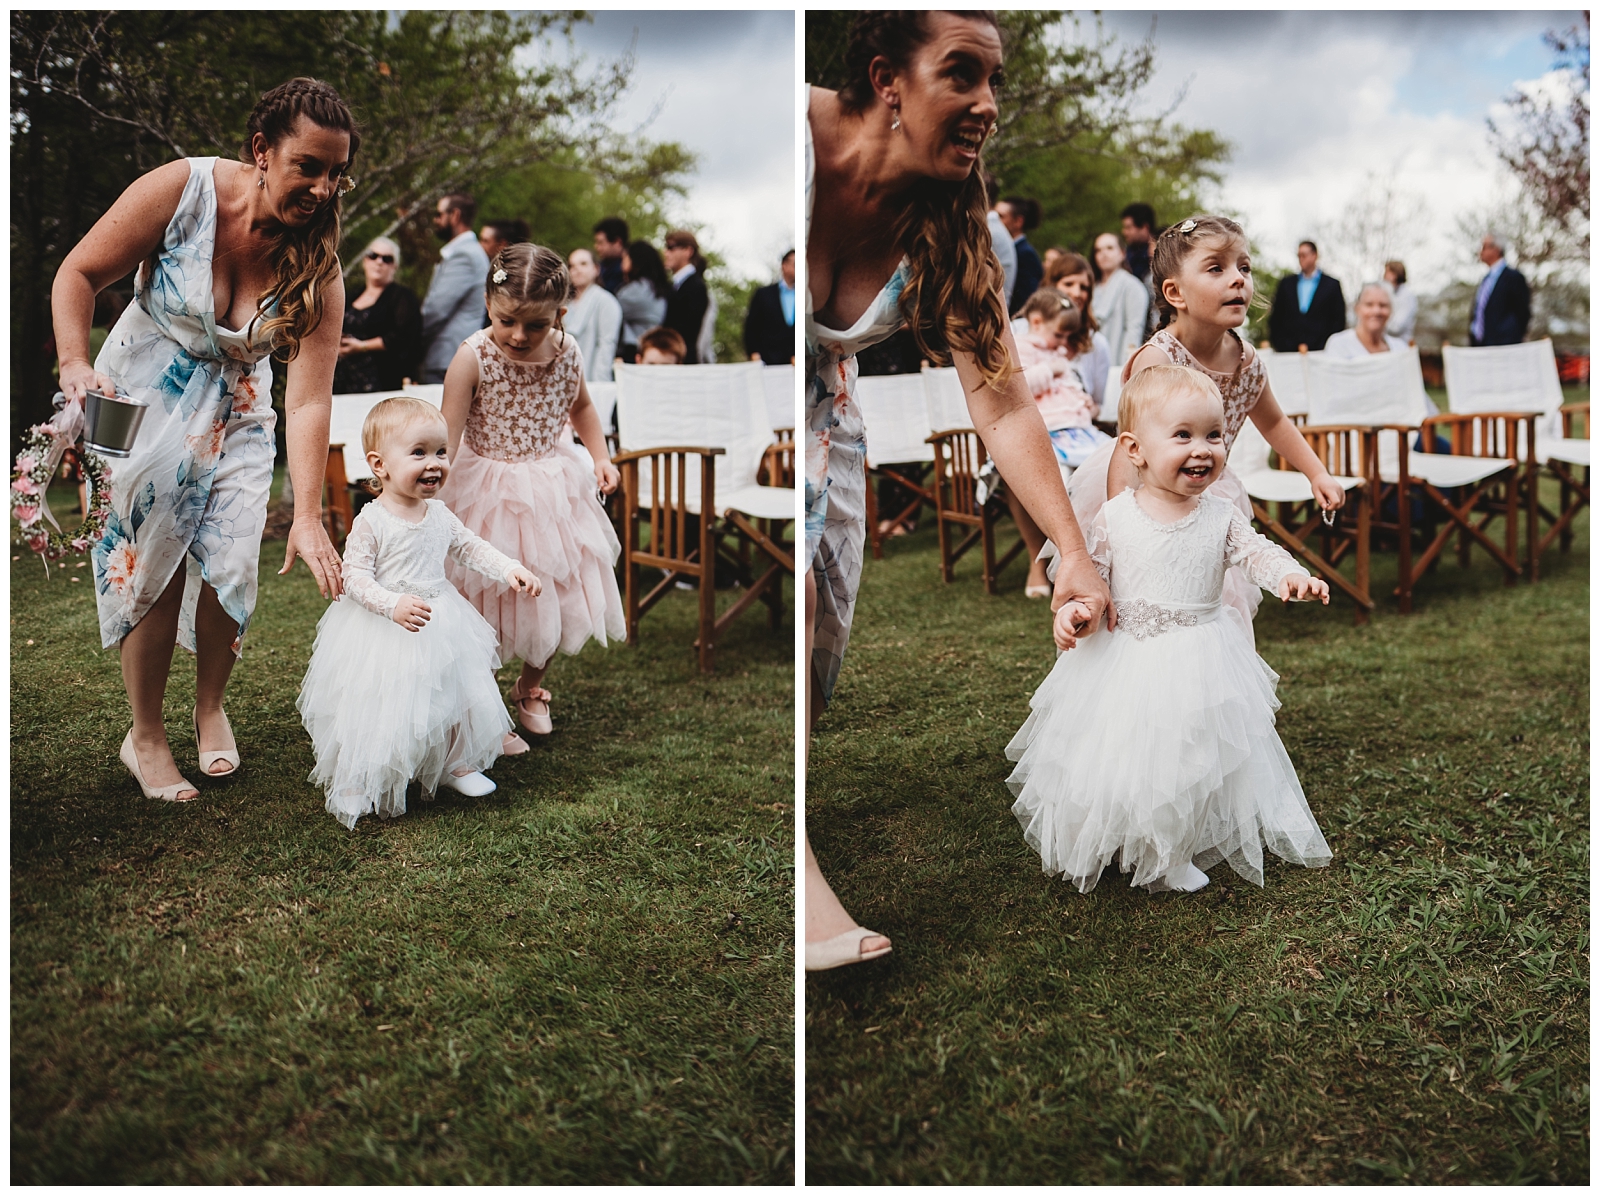 Flower girls running towards gazebo to meet her Dad the Groom as her grandmother reaches for her hand